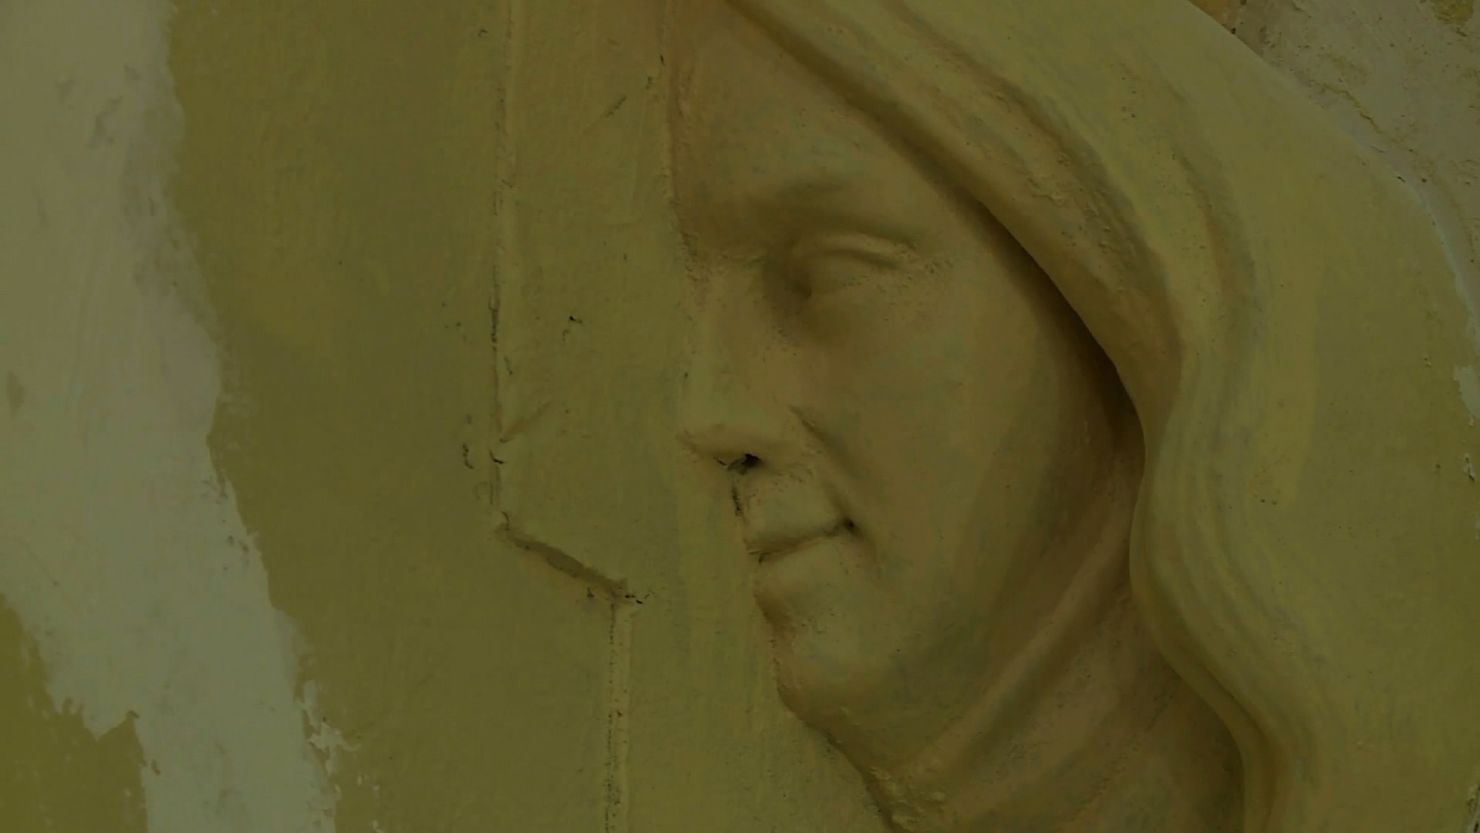 Mystery face uncovered behind church organ in Newport, Rhode Island.